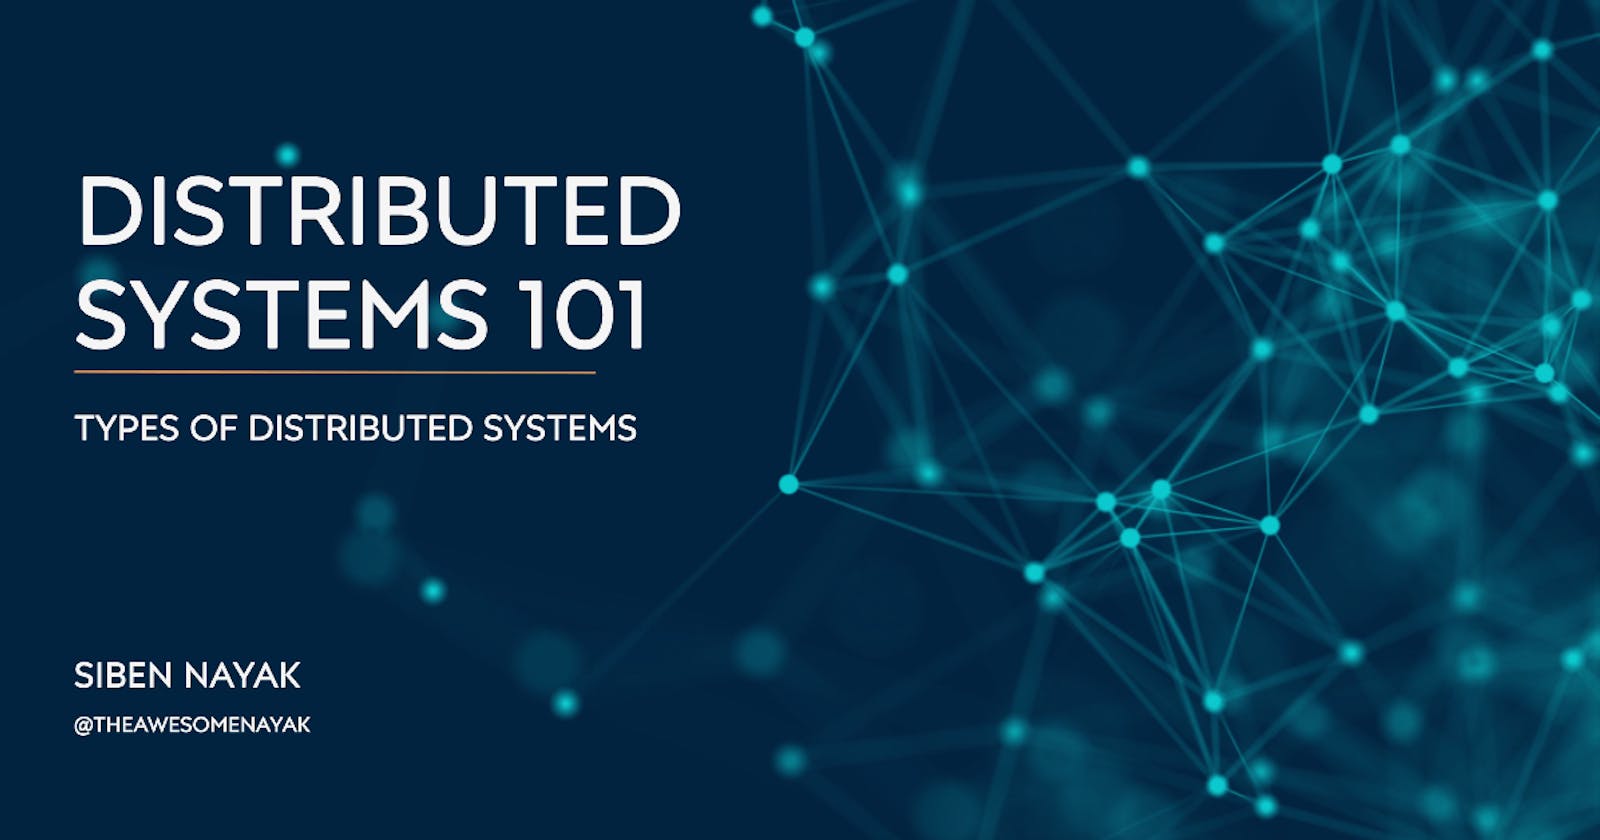 Distributed Systems 101 - Types of Distributed Systems